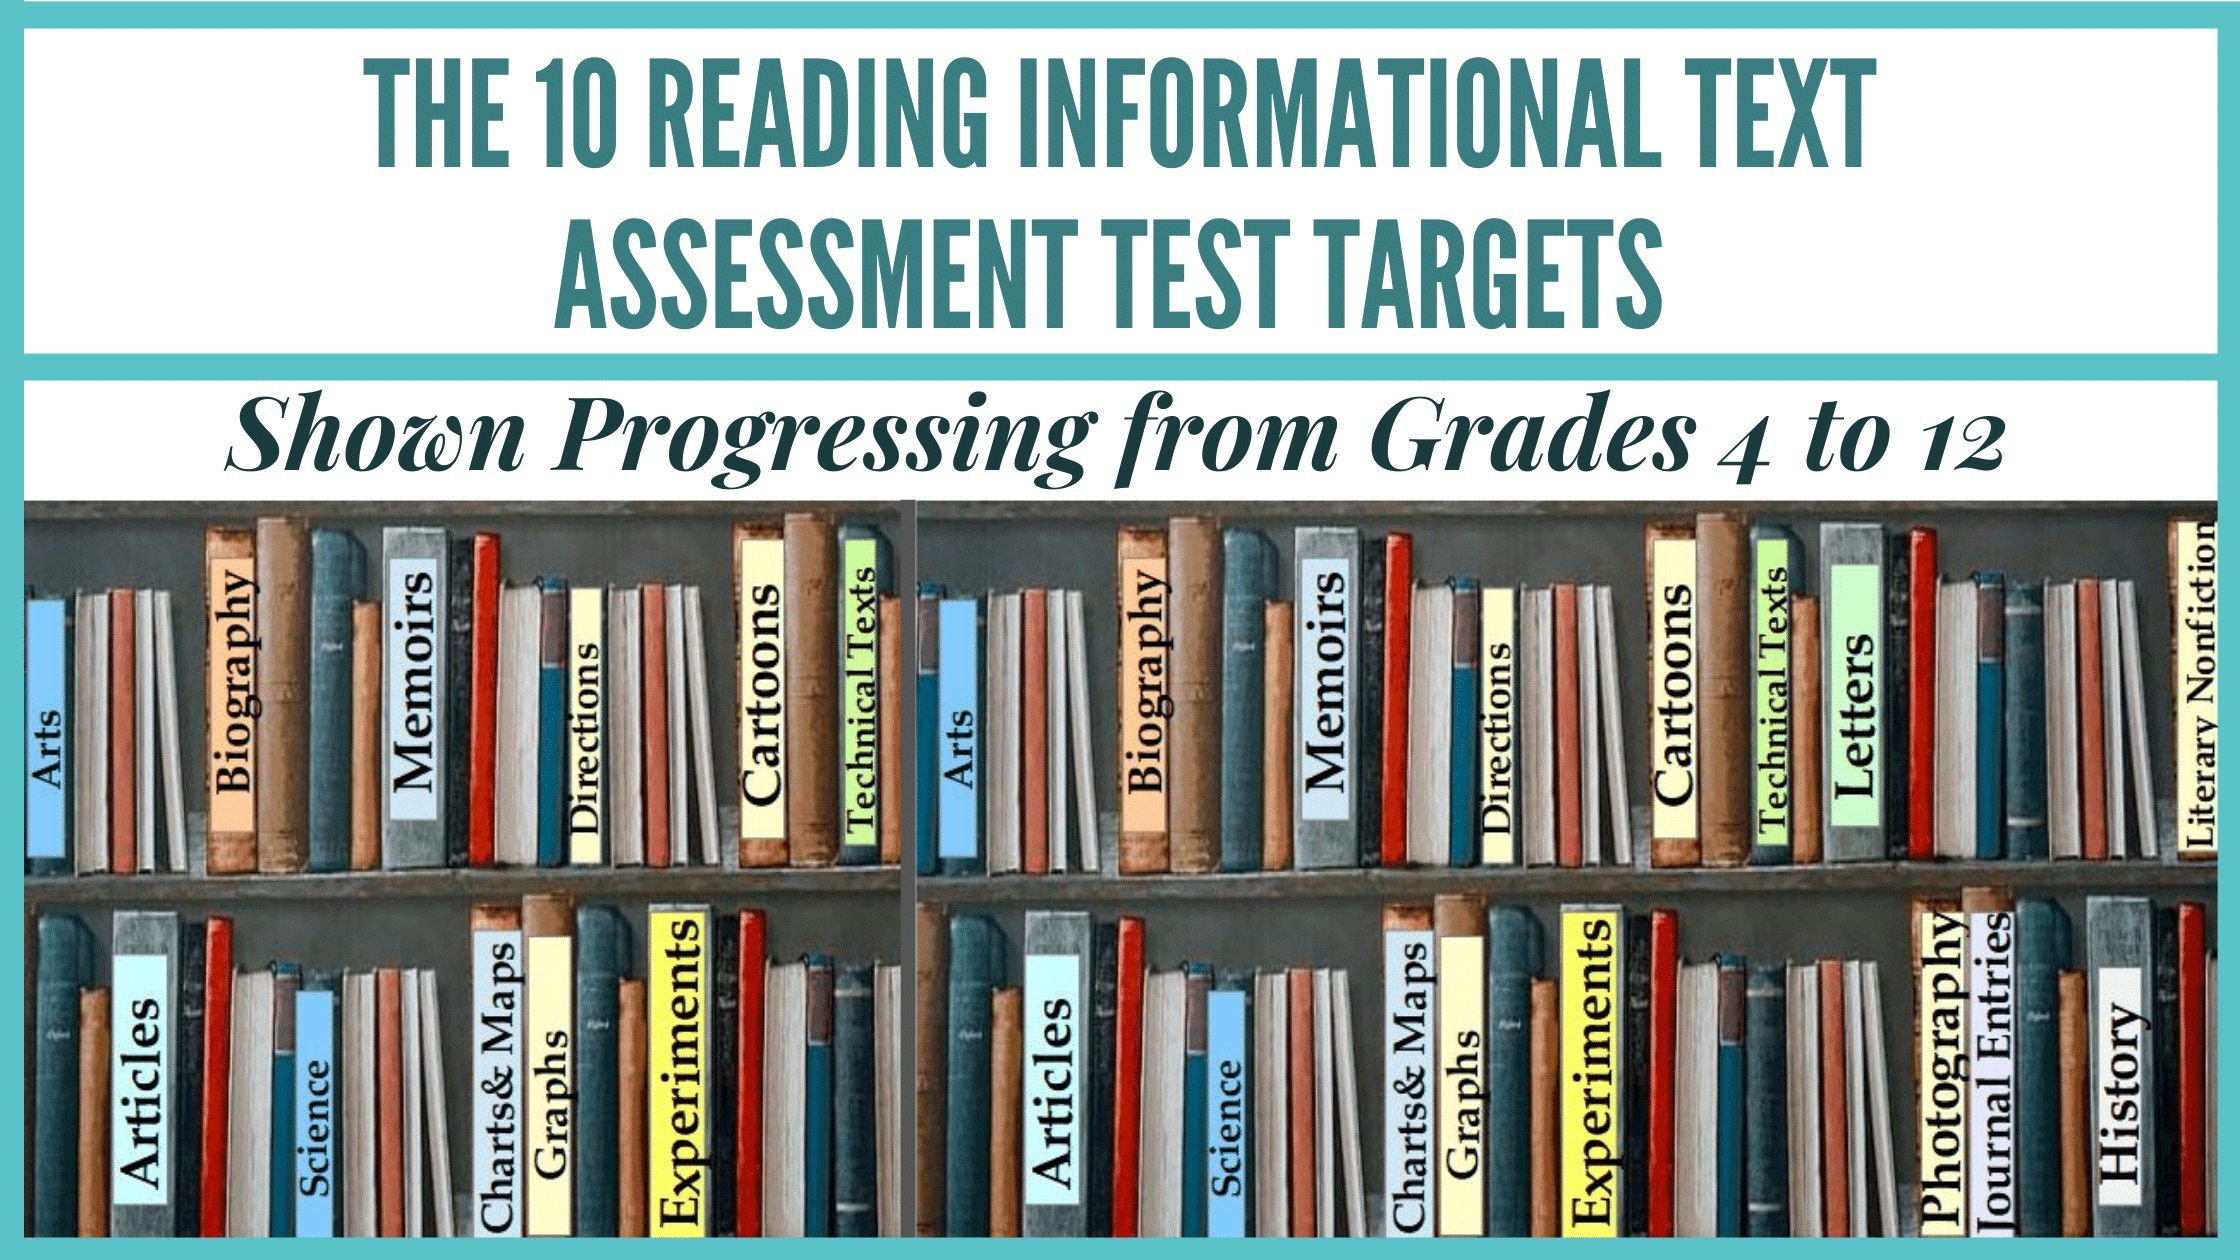 the 10 reading informational text assessment test targets shown progressing